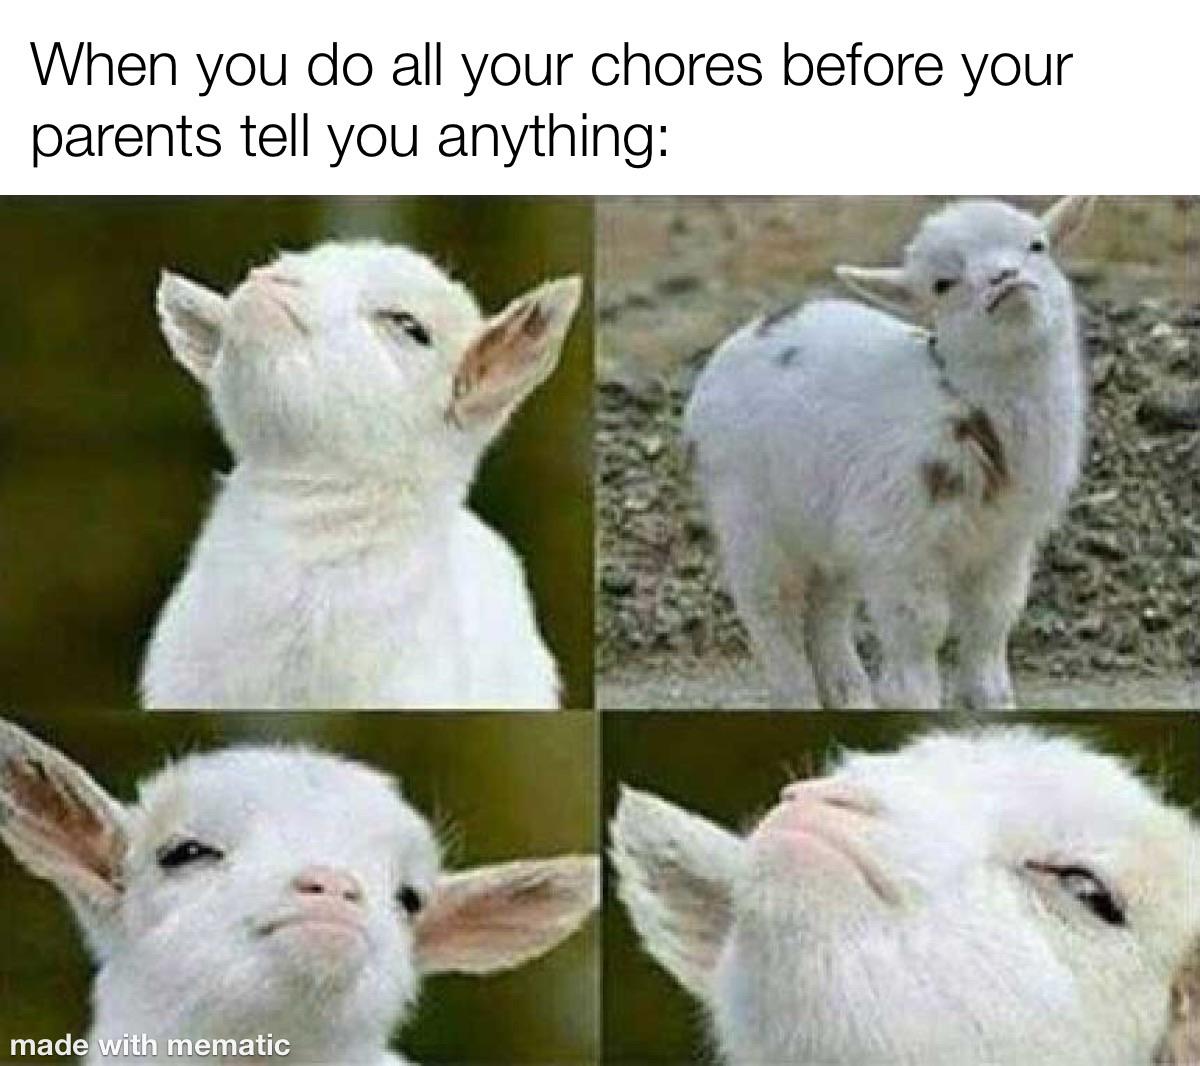 Wholesome memes, No Wholesome Memes Wholesome memes, No text: When you do all your chores before your parents tell you anything: made ith mematic 